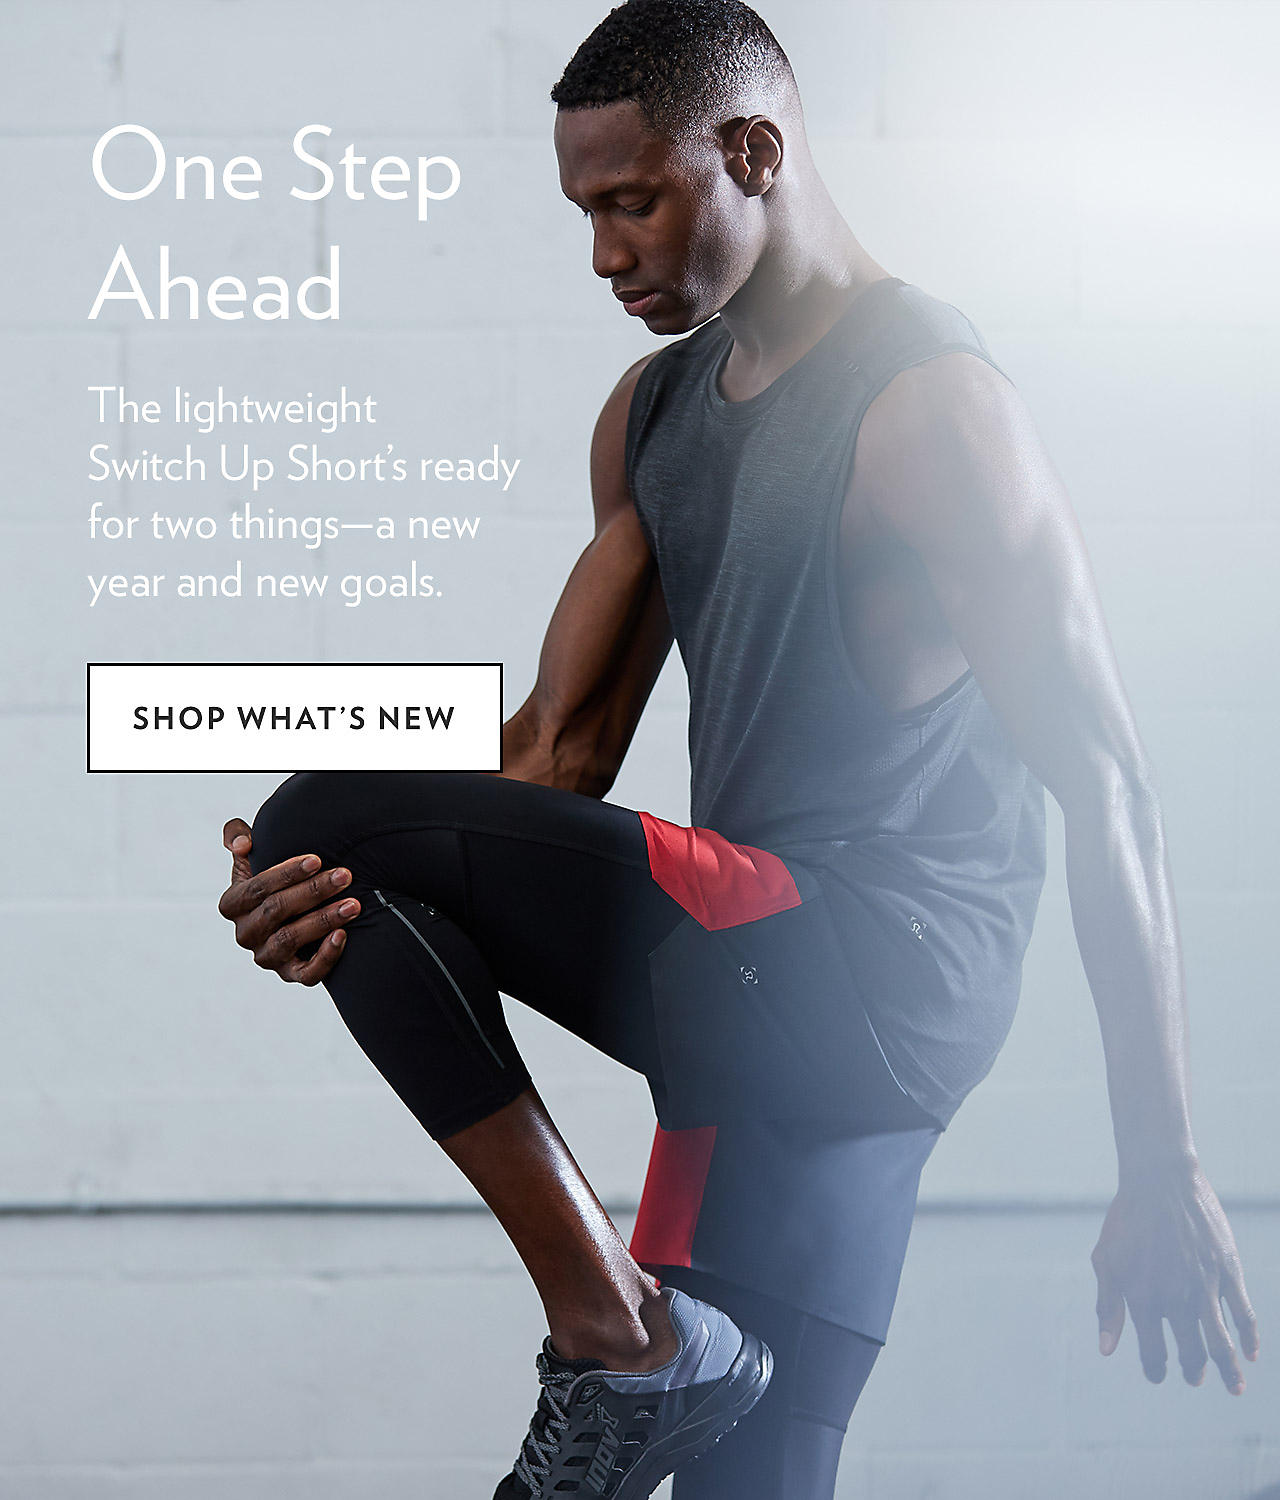 One Step Ahead - SHOP WHAT'S NEW